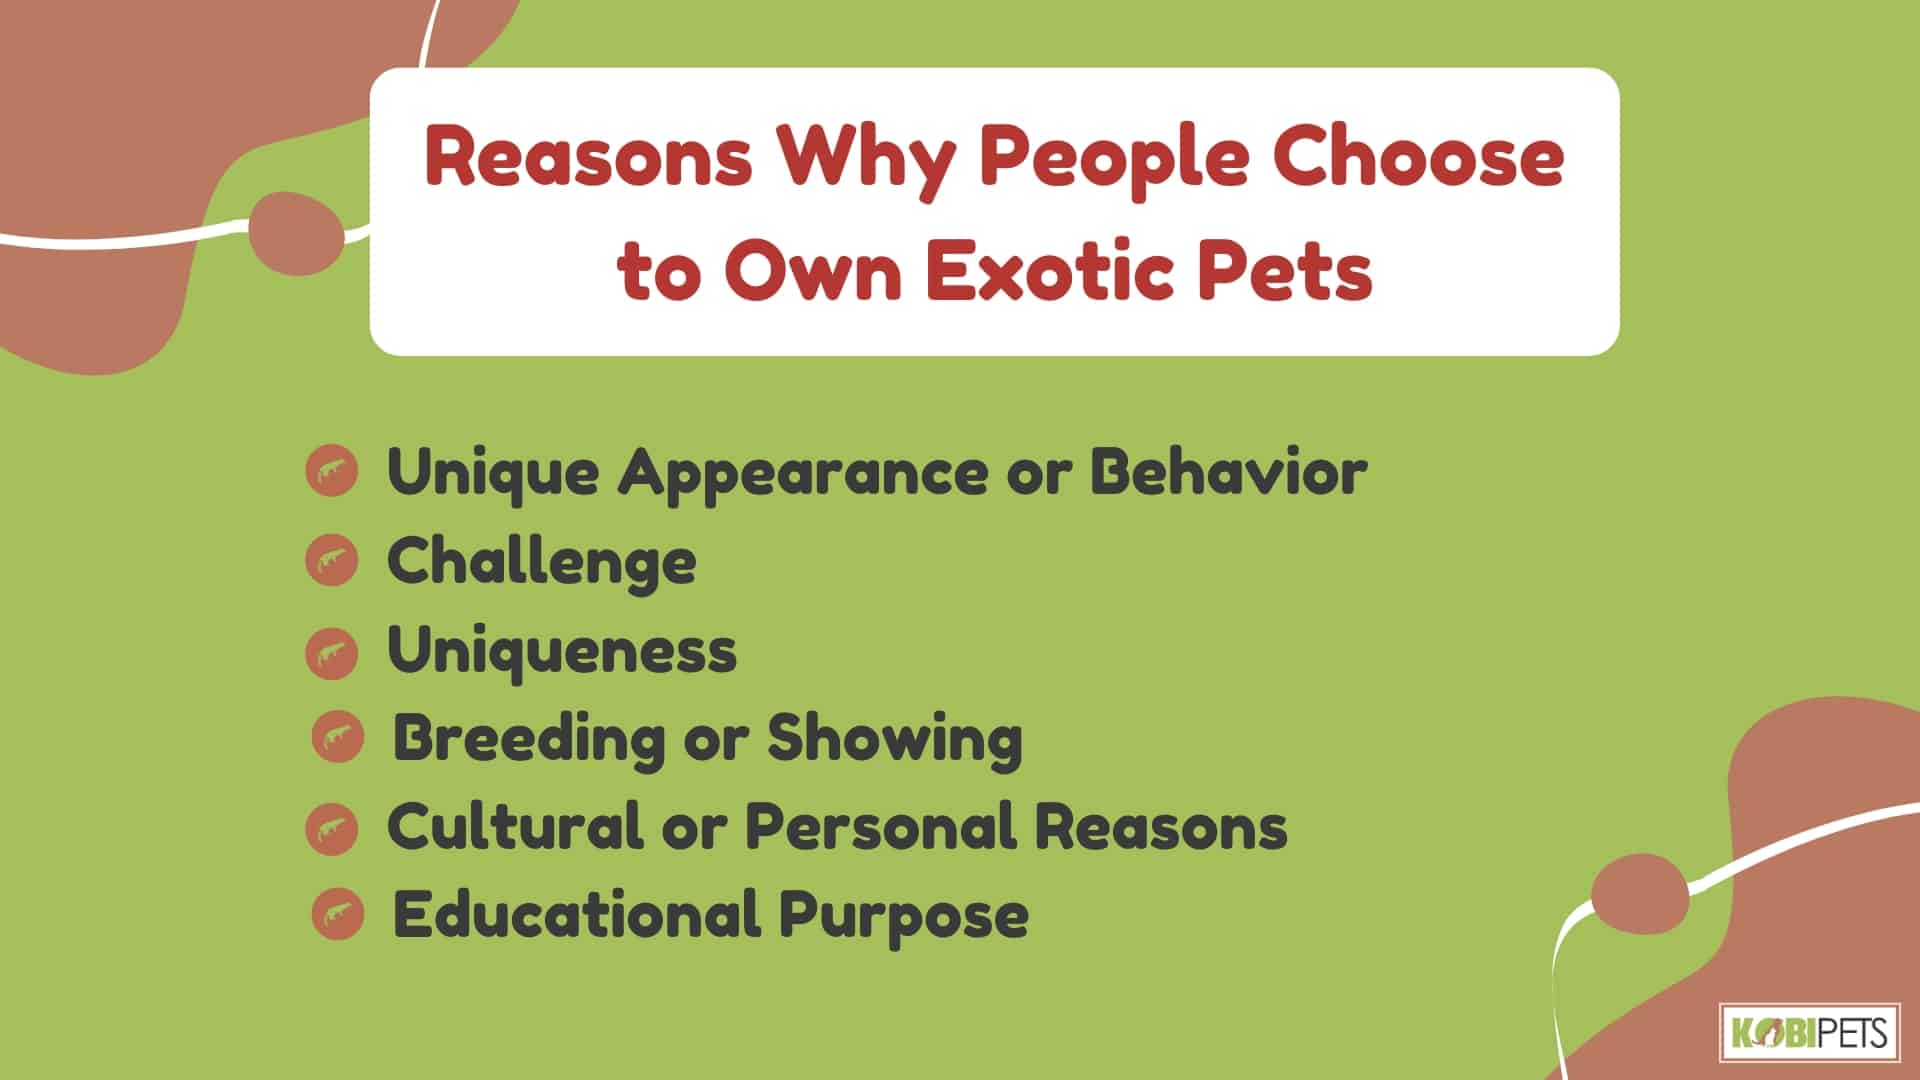 Reasons Why People Choose to Own Exotic Pets